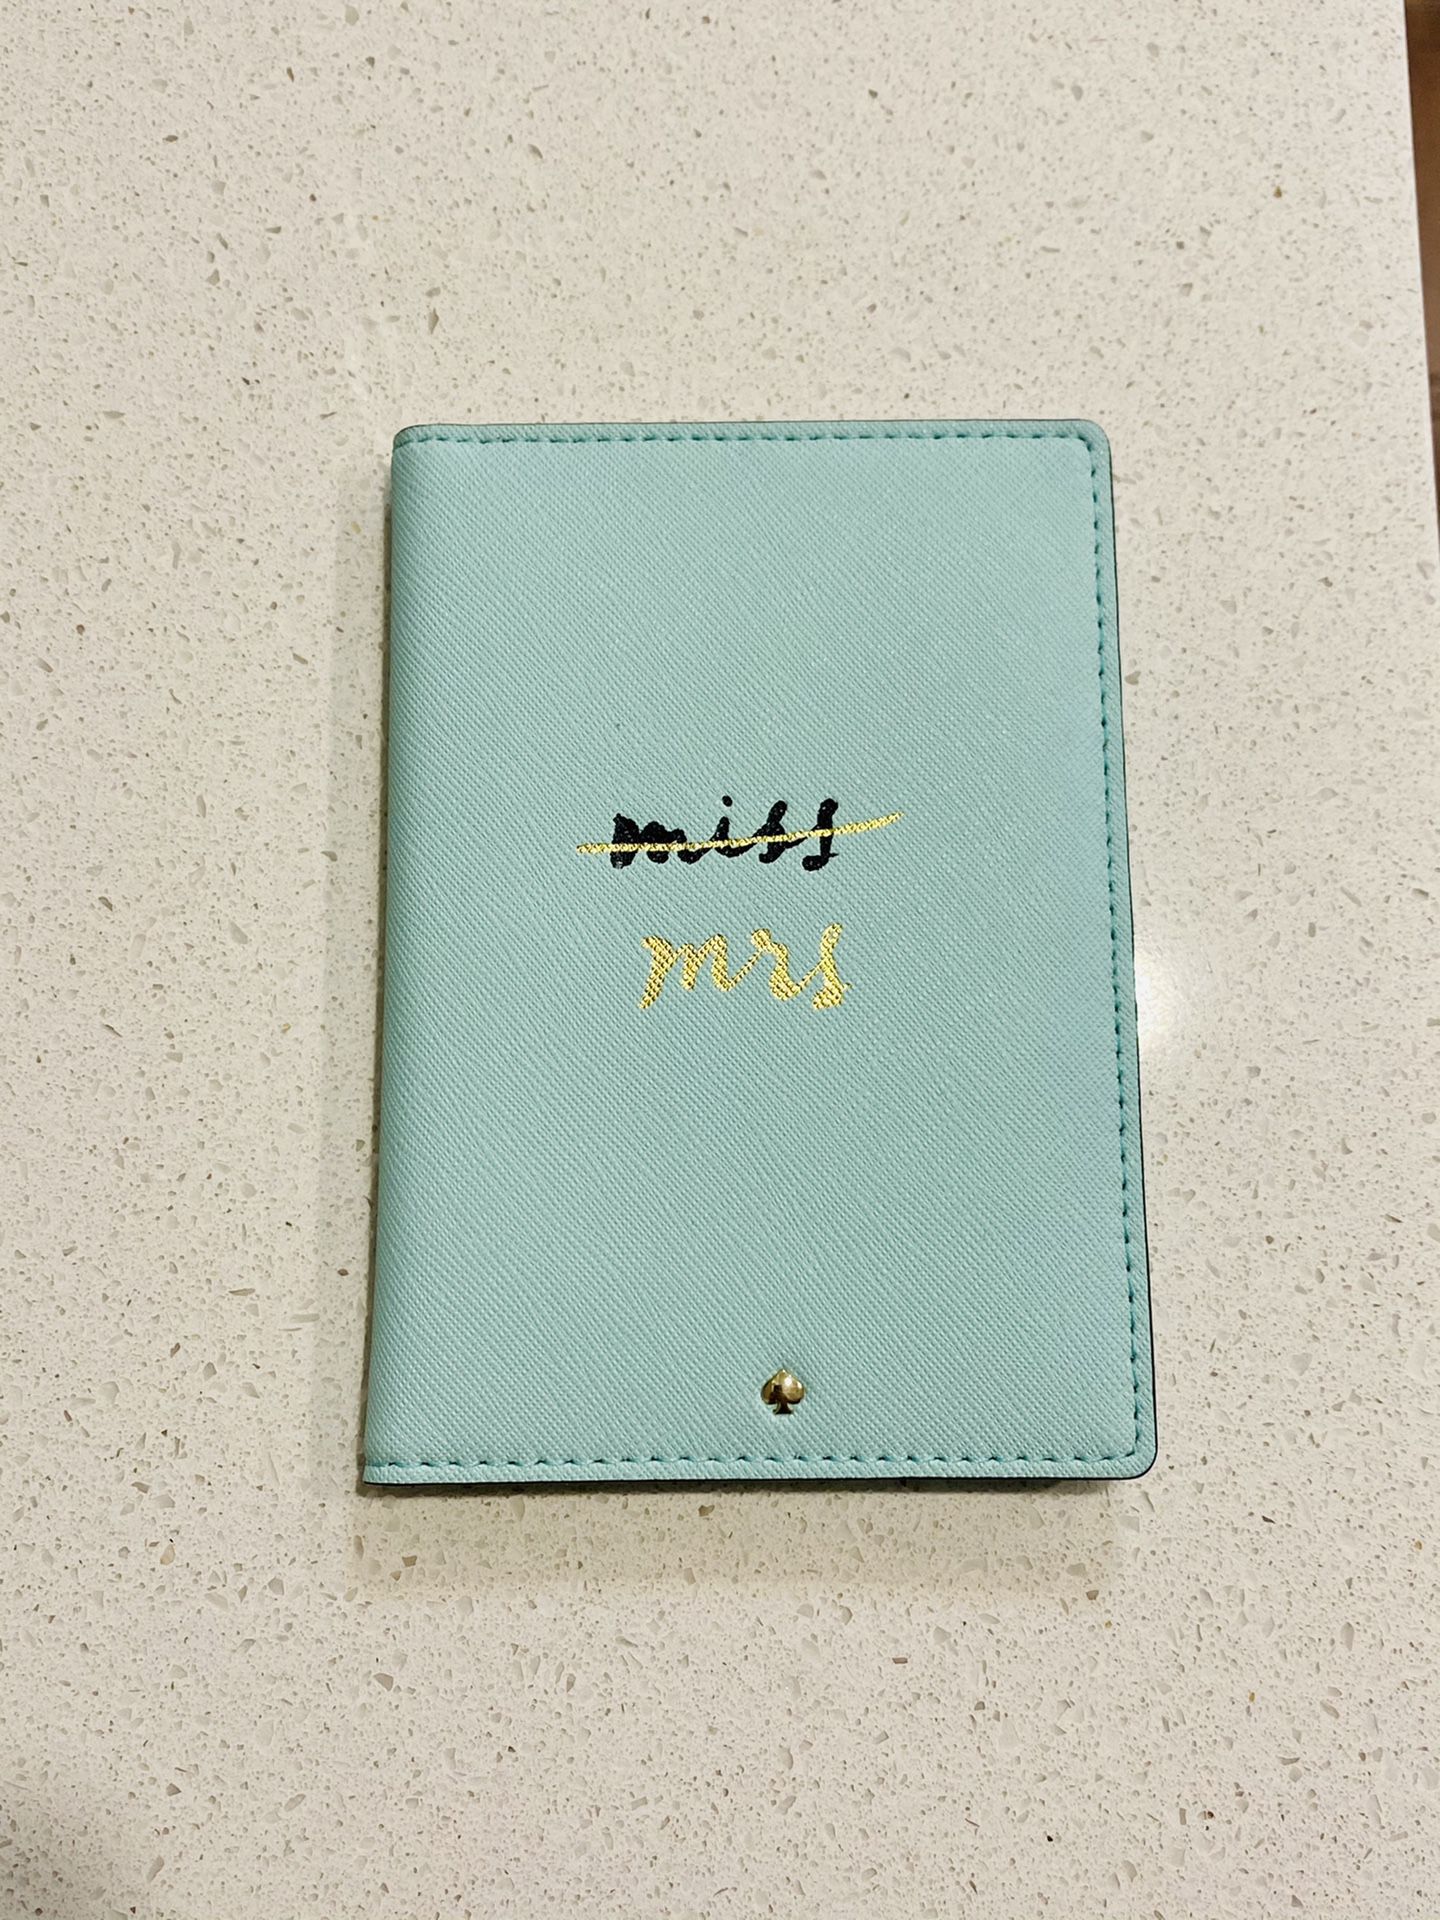 Kate Spade Miss to Mrs Passport Holder - Never Used Brand New